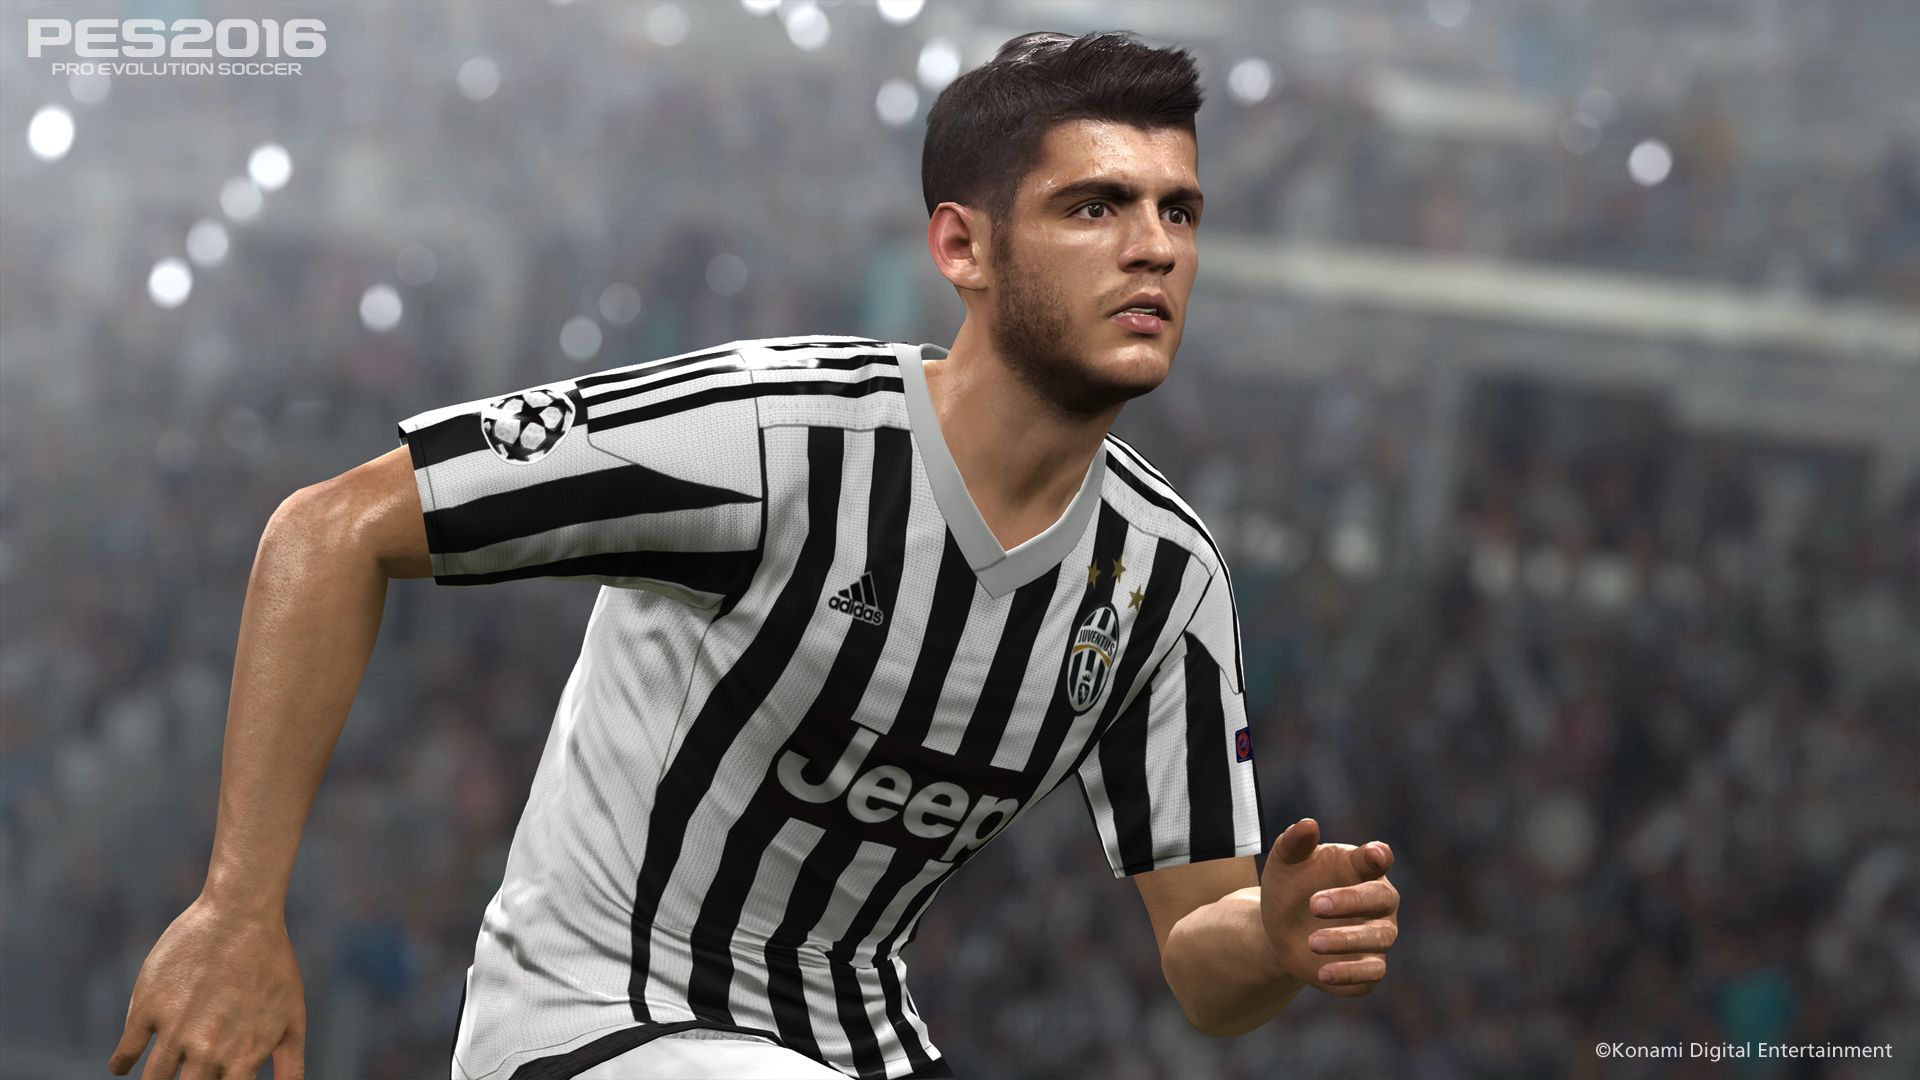 Pro Evolution Soccer 2016 is a watershed release that should put FIFA and  EA on notice